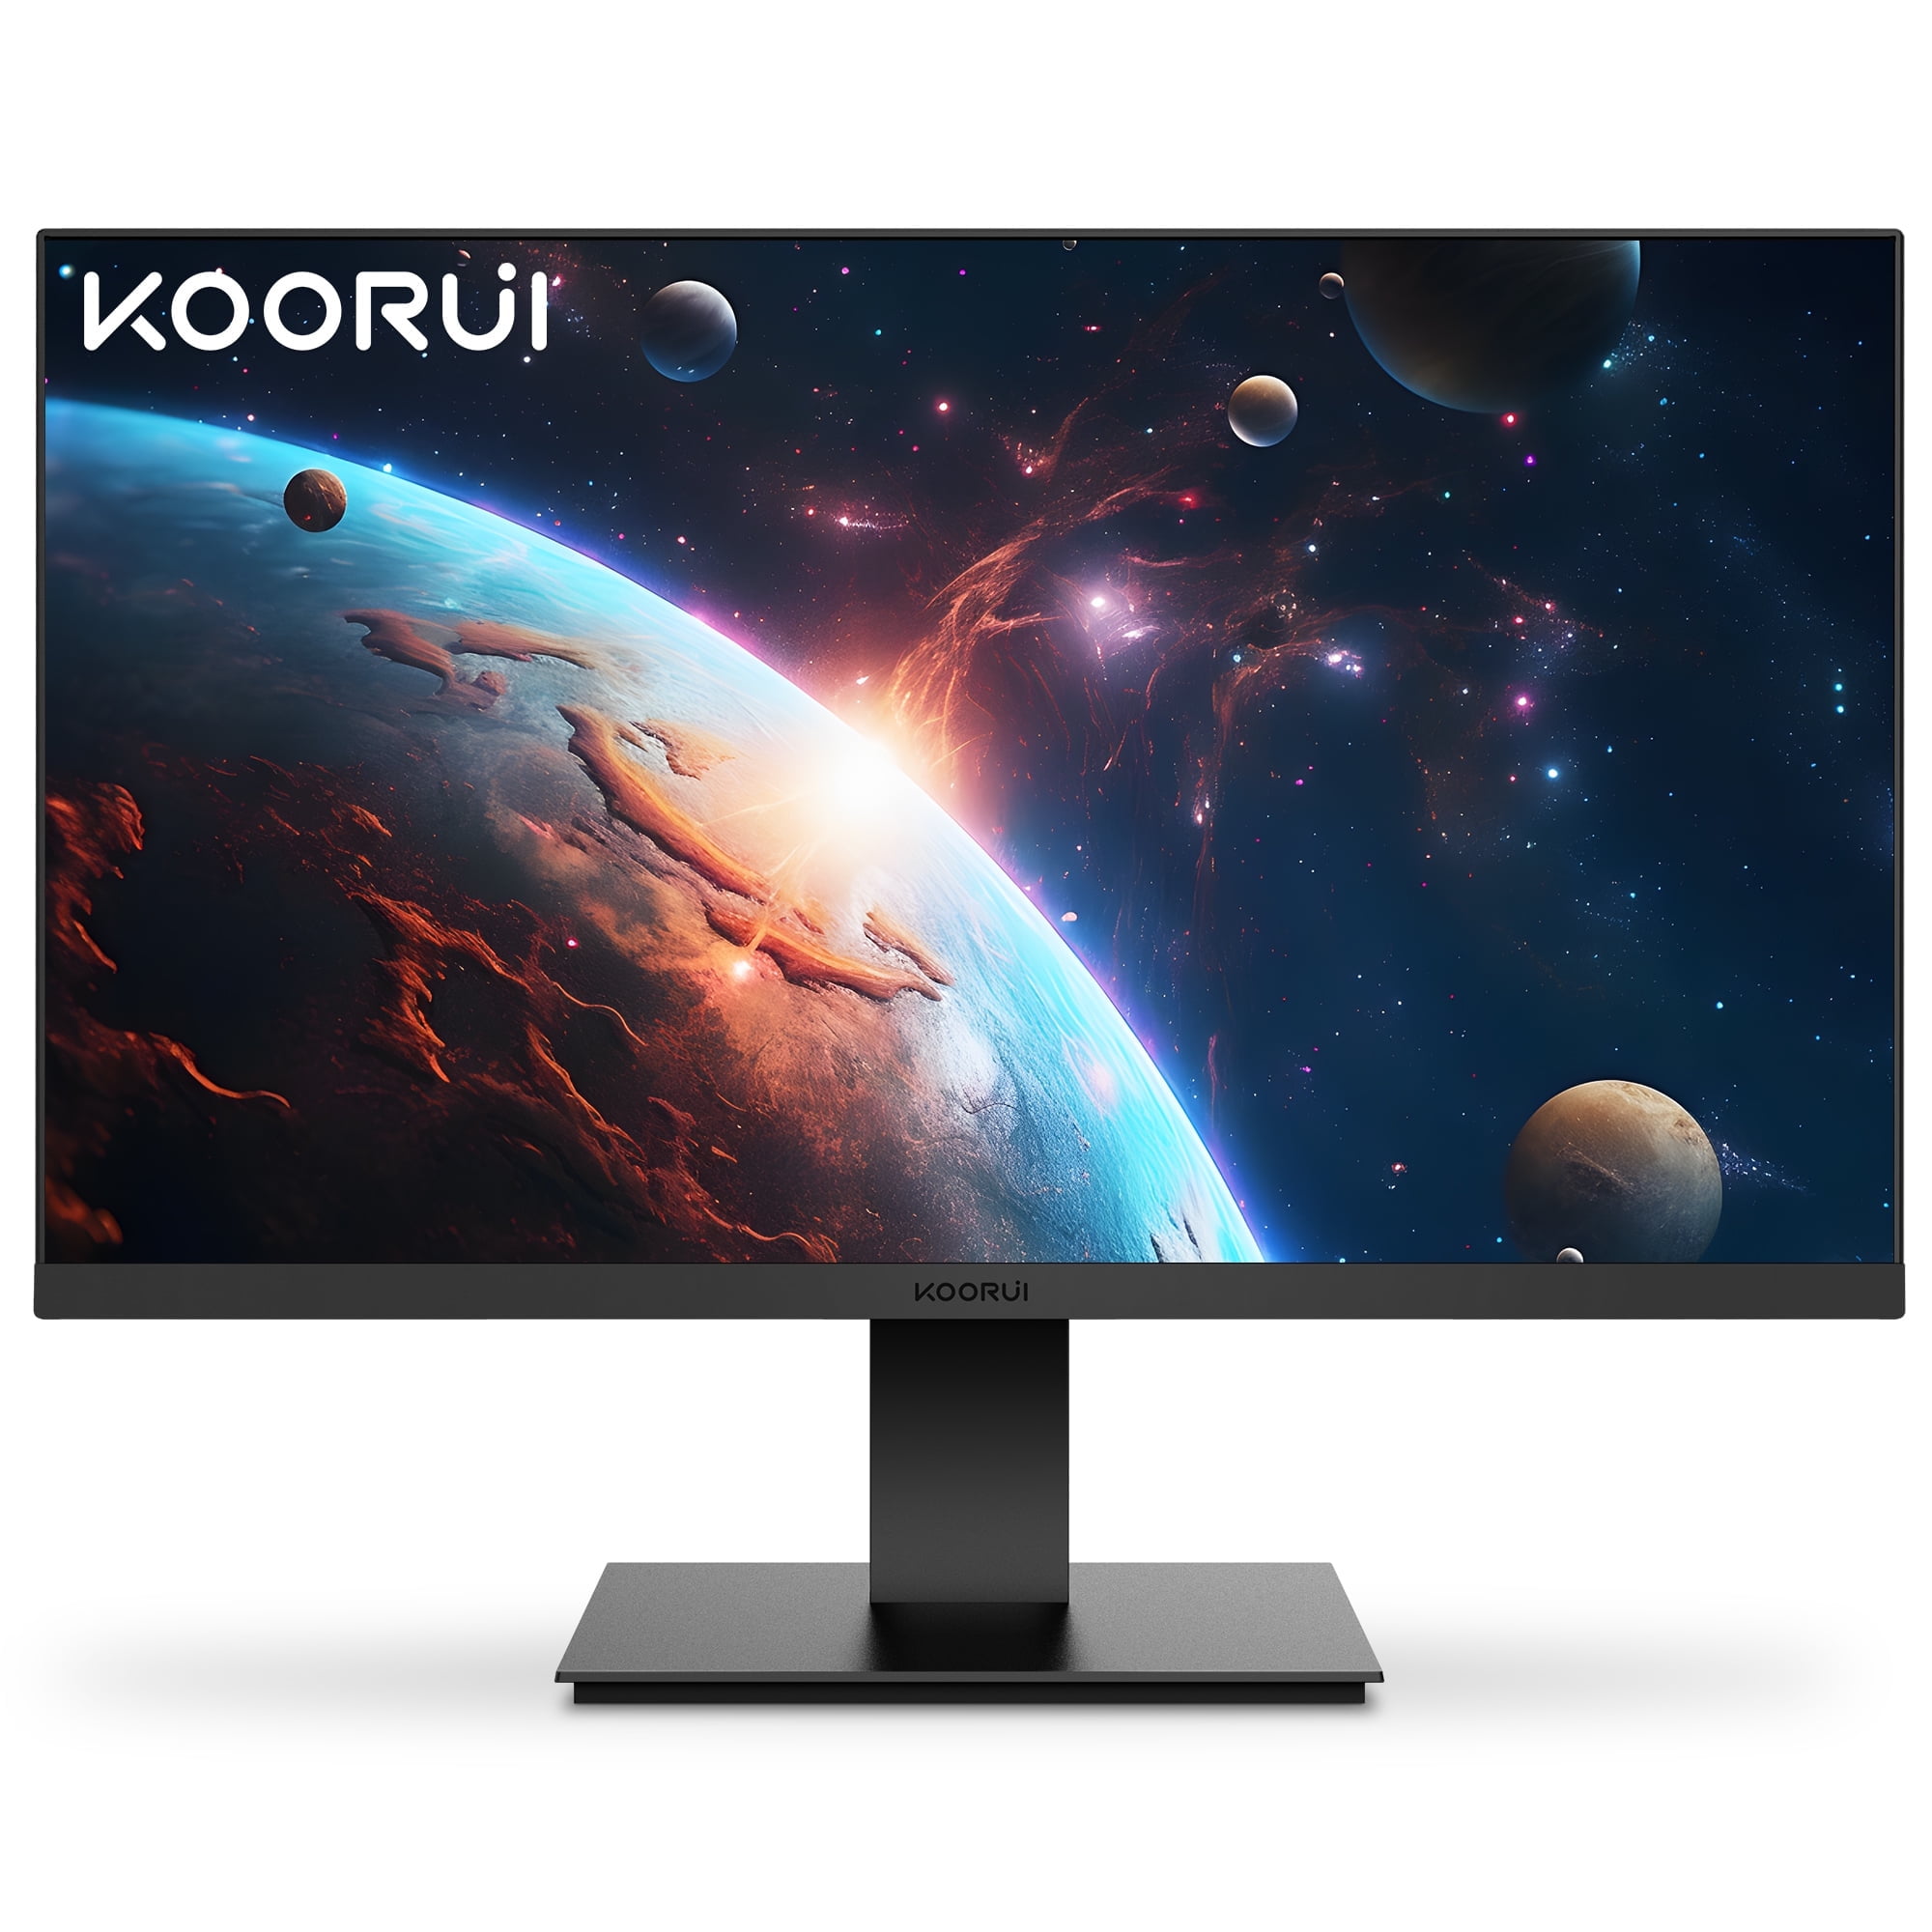 KOORUI ‎22N1 monitor 22 LED Full HD • Unboxing, installation and settings  overview 